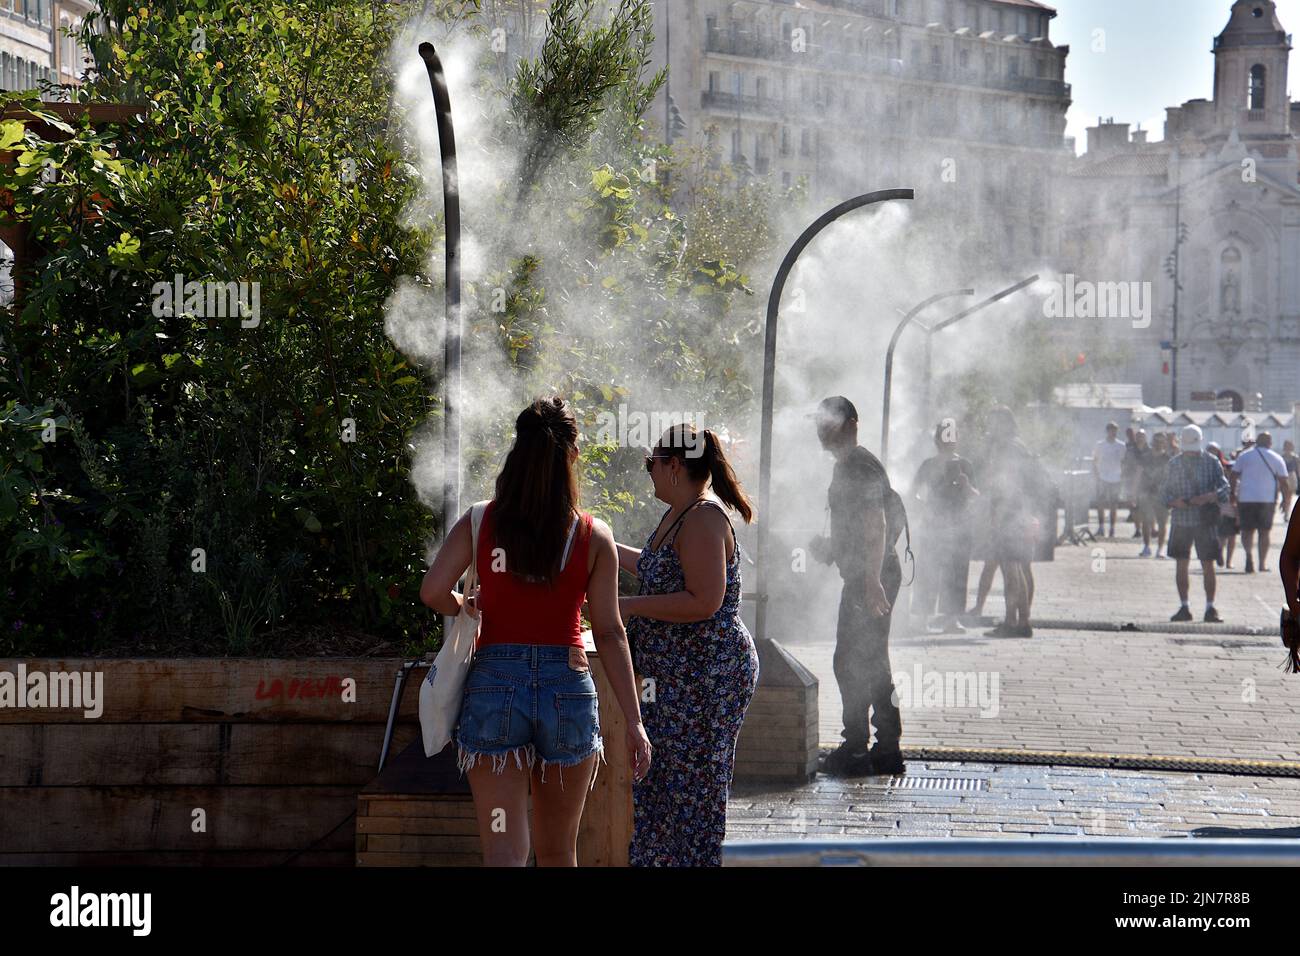 People pass under water sprayers in PACA. To cope with the high temperatures and a probable heat wave, the City of Marseille has installed misters on the quays of the Old Port so that passersby can cool off. Stock Photo